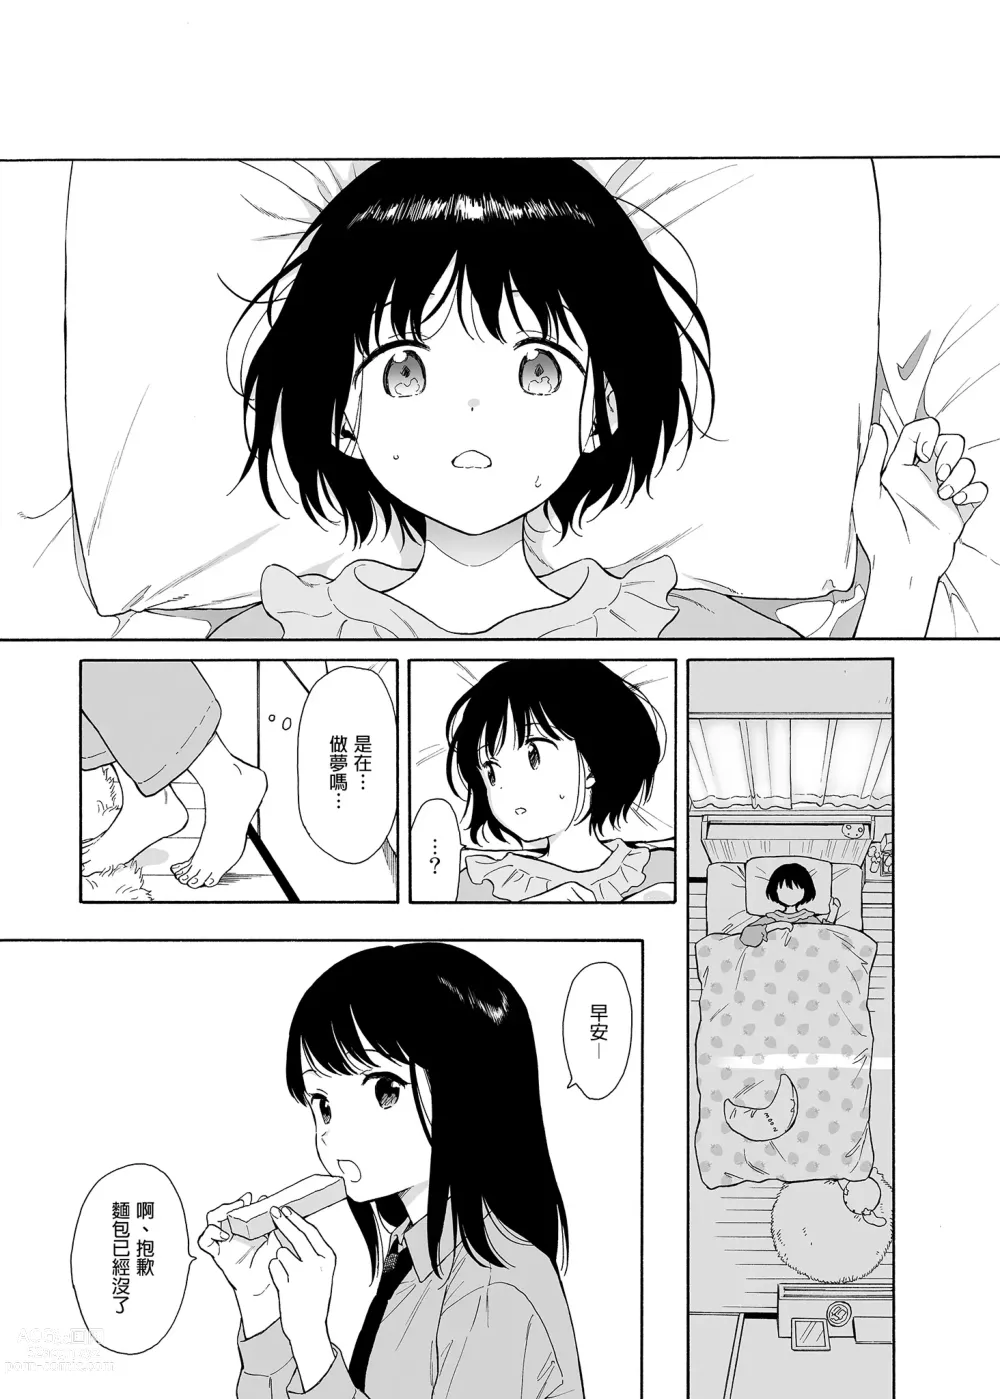 Page 25 of doujinshi instant suck2